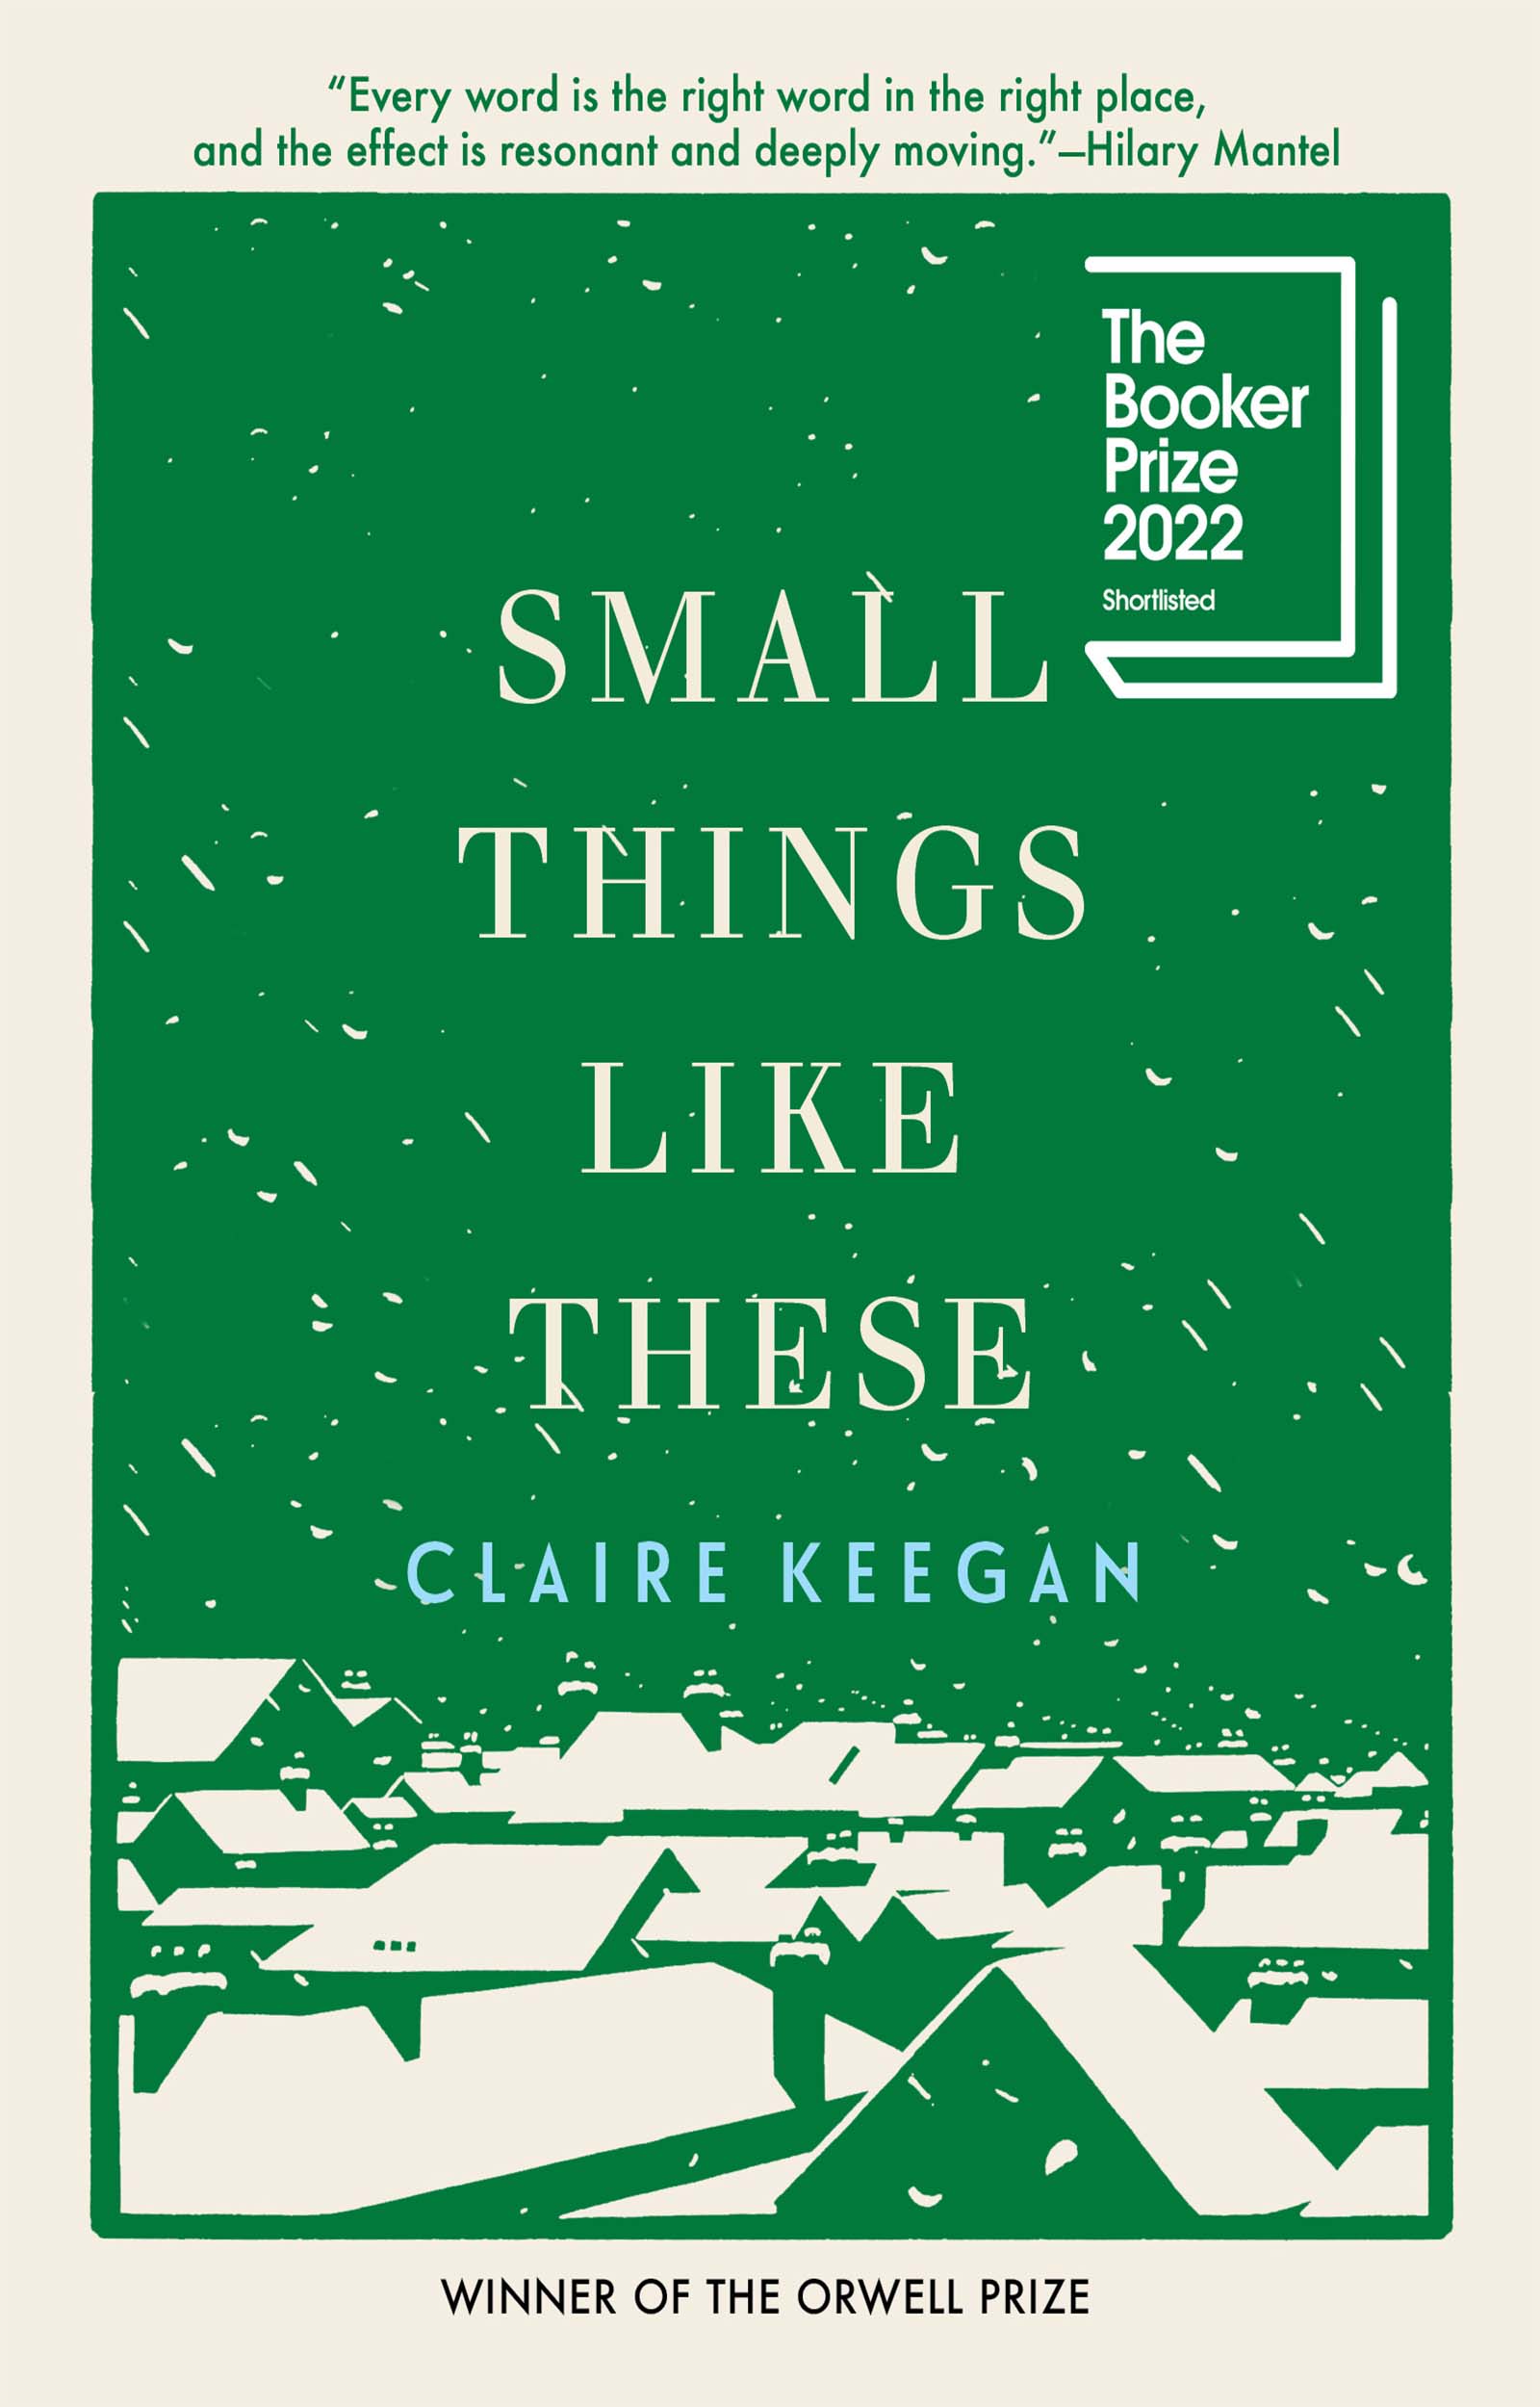 Cover Image of Small Things Like These